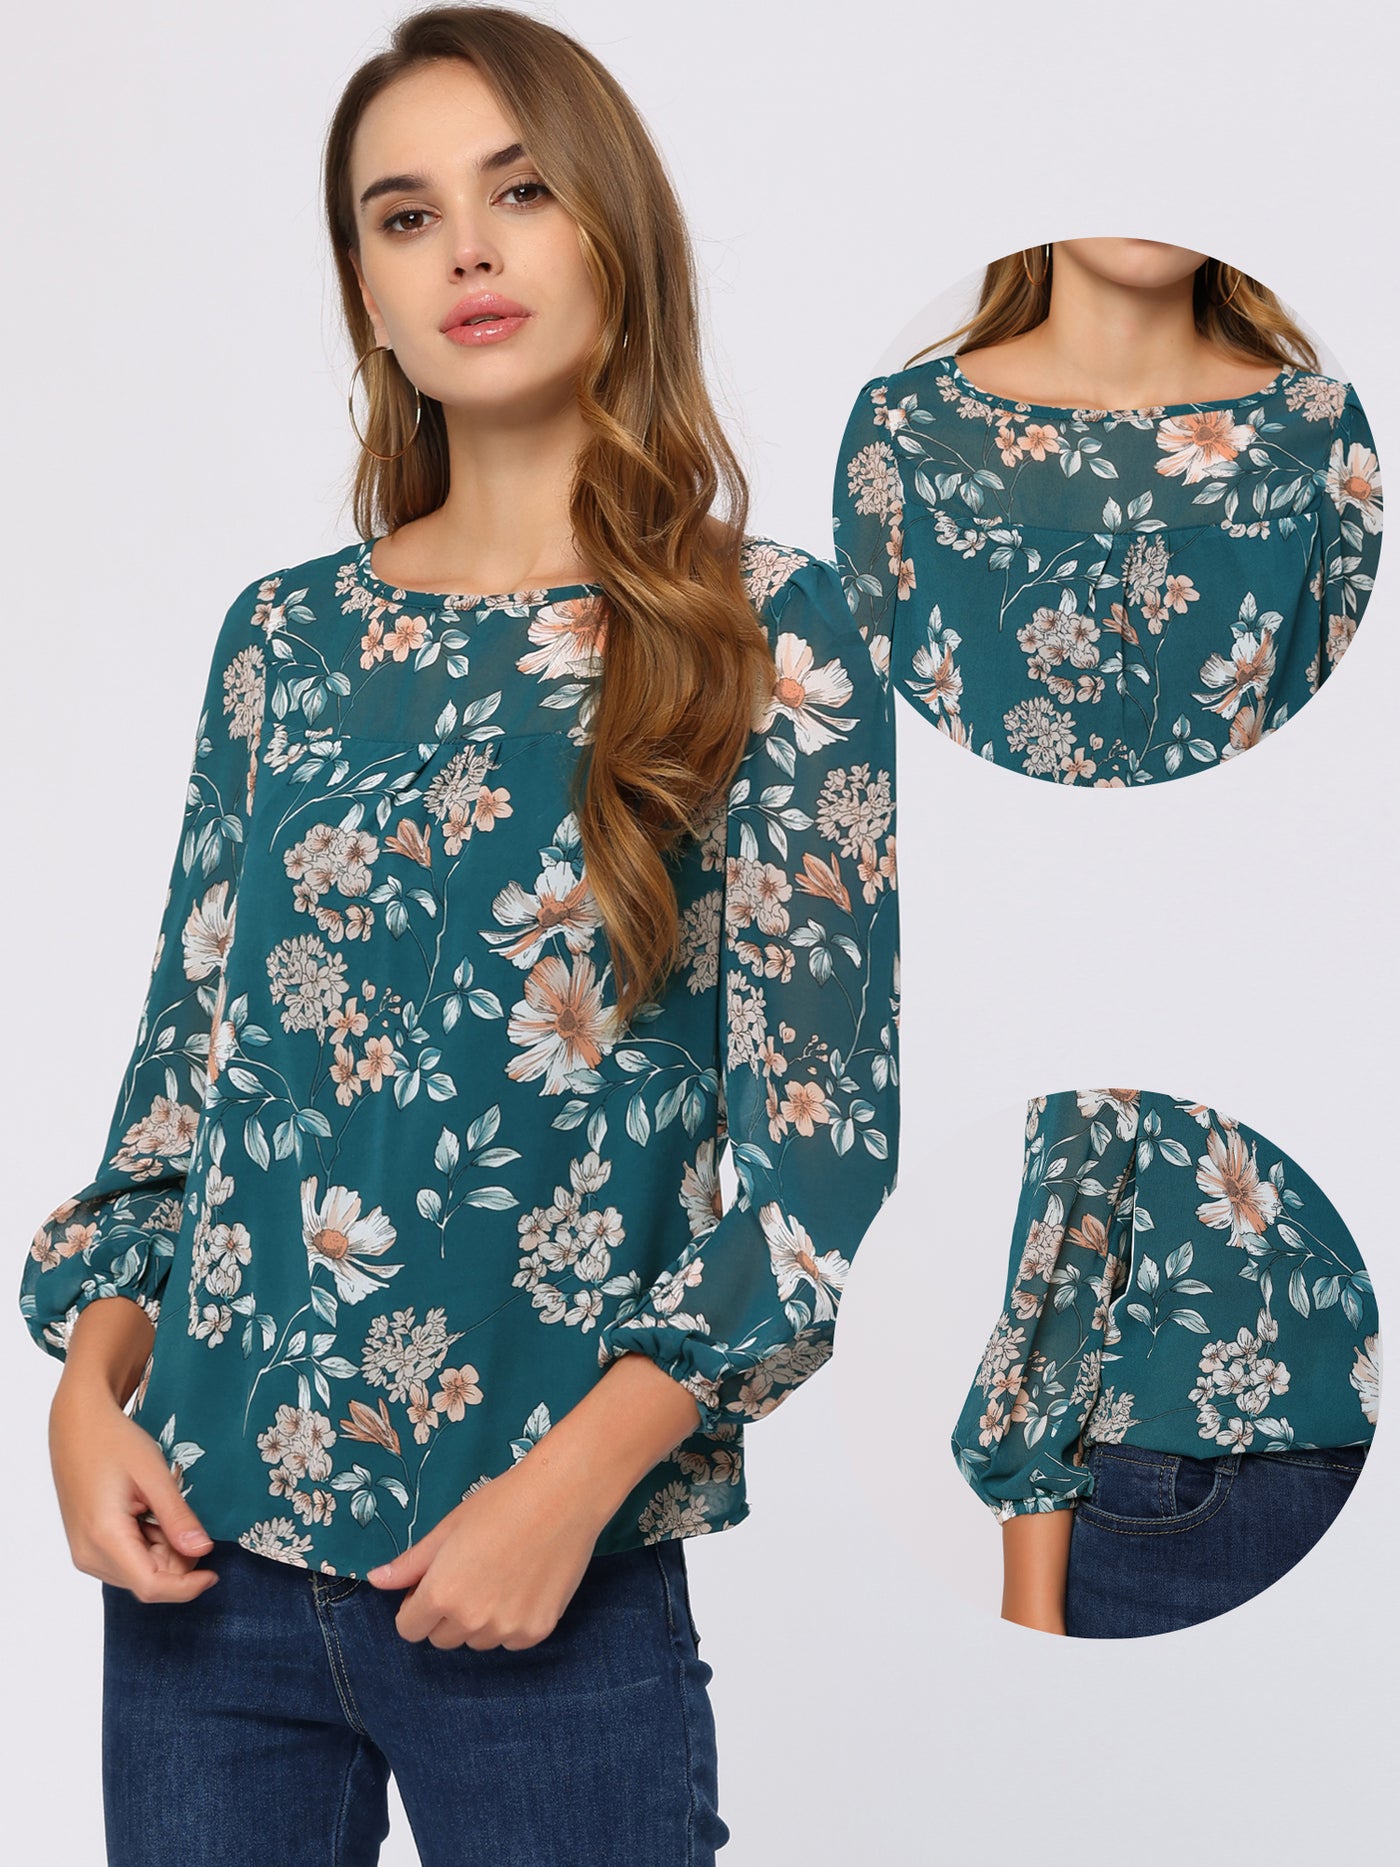 Allegra K Floral Print Spring Casual Round Neck Long Sleeve Chiffon Blouse